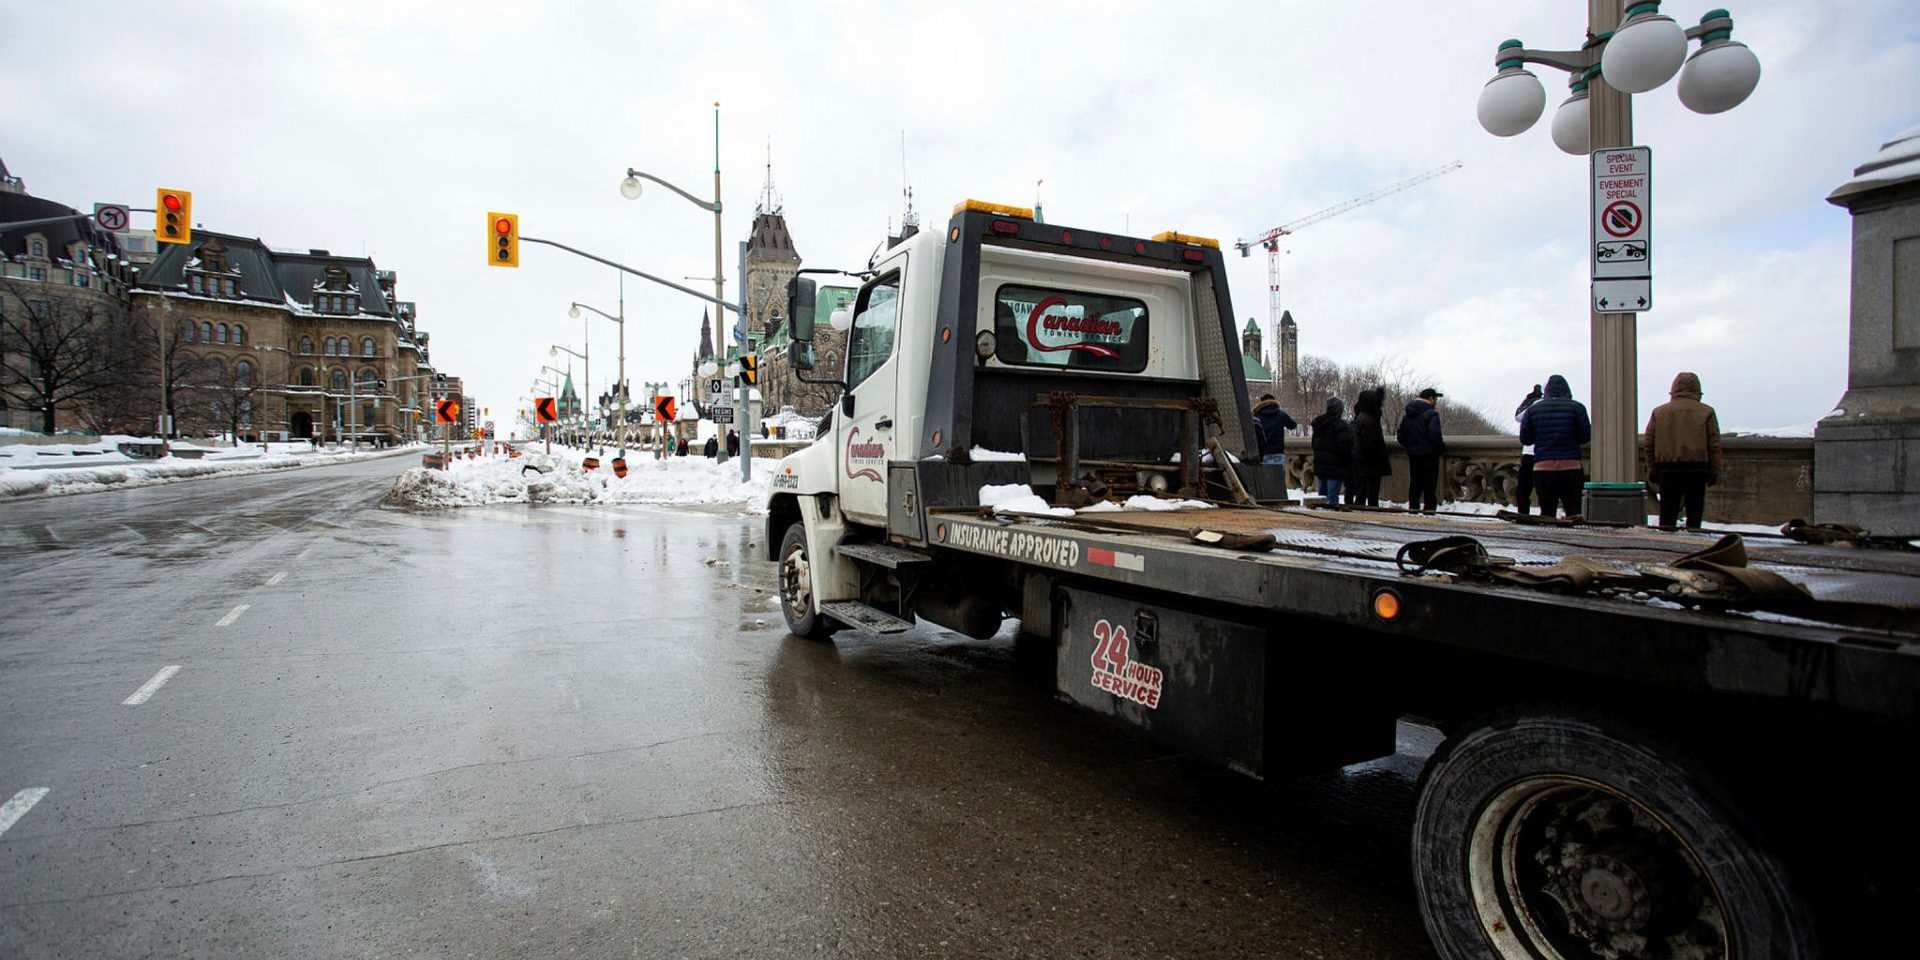 A flatbed tow truck sits parked within view of Parliament Hill on Jan. 28, 2023. Ottawa Bylaw Services said it issued 244 parking tickets and towed 25 vehicles tied to the event over the weekend. The Hill Times photograph by Andrew Meade